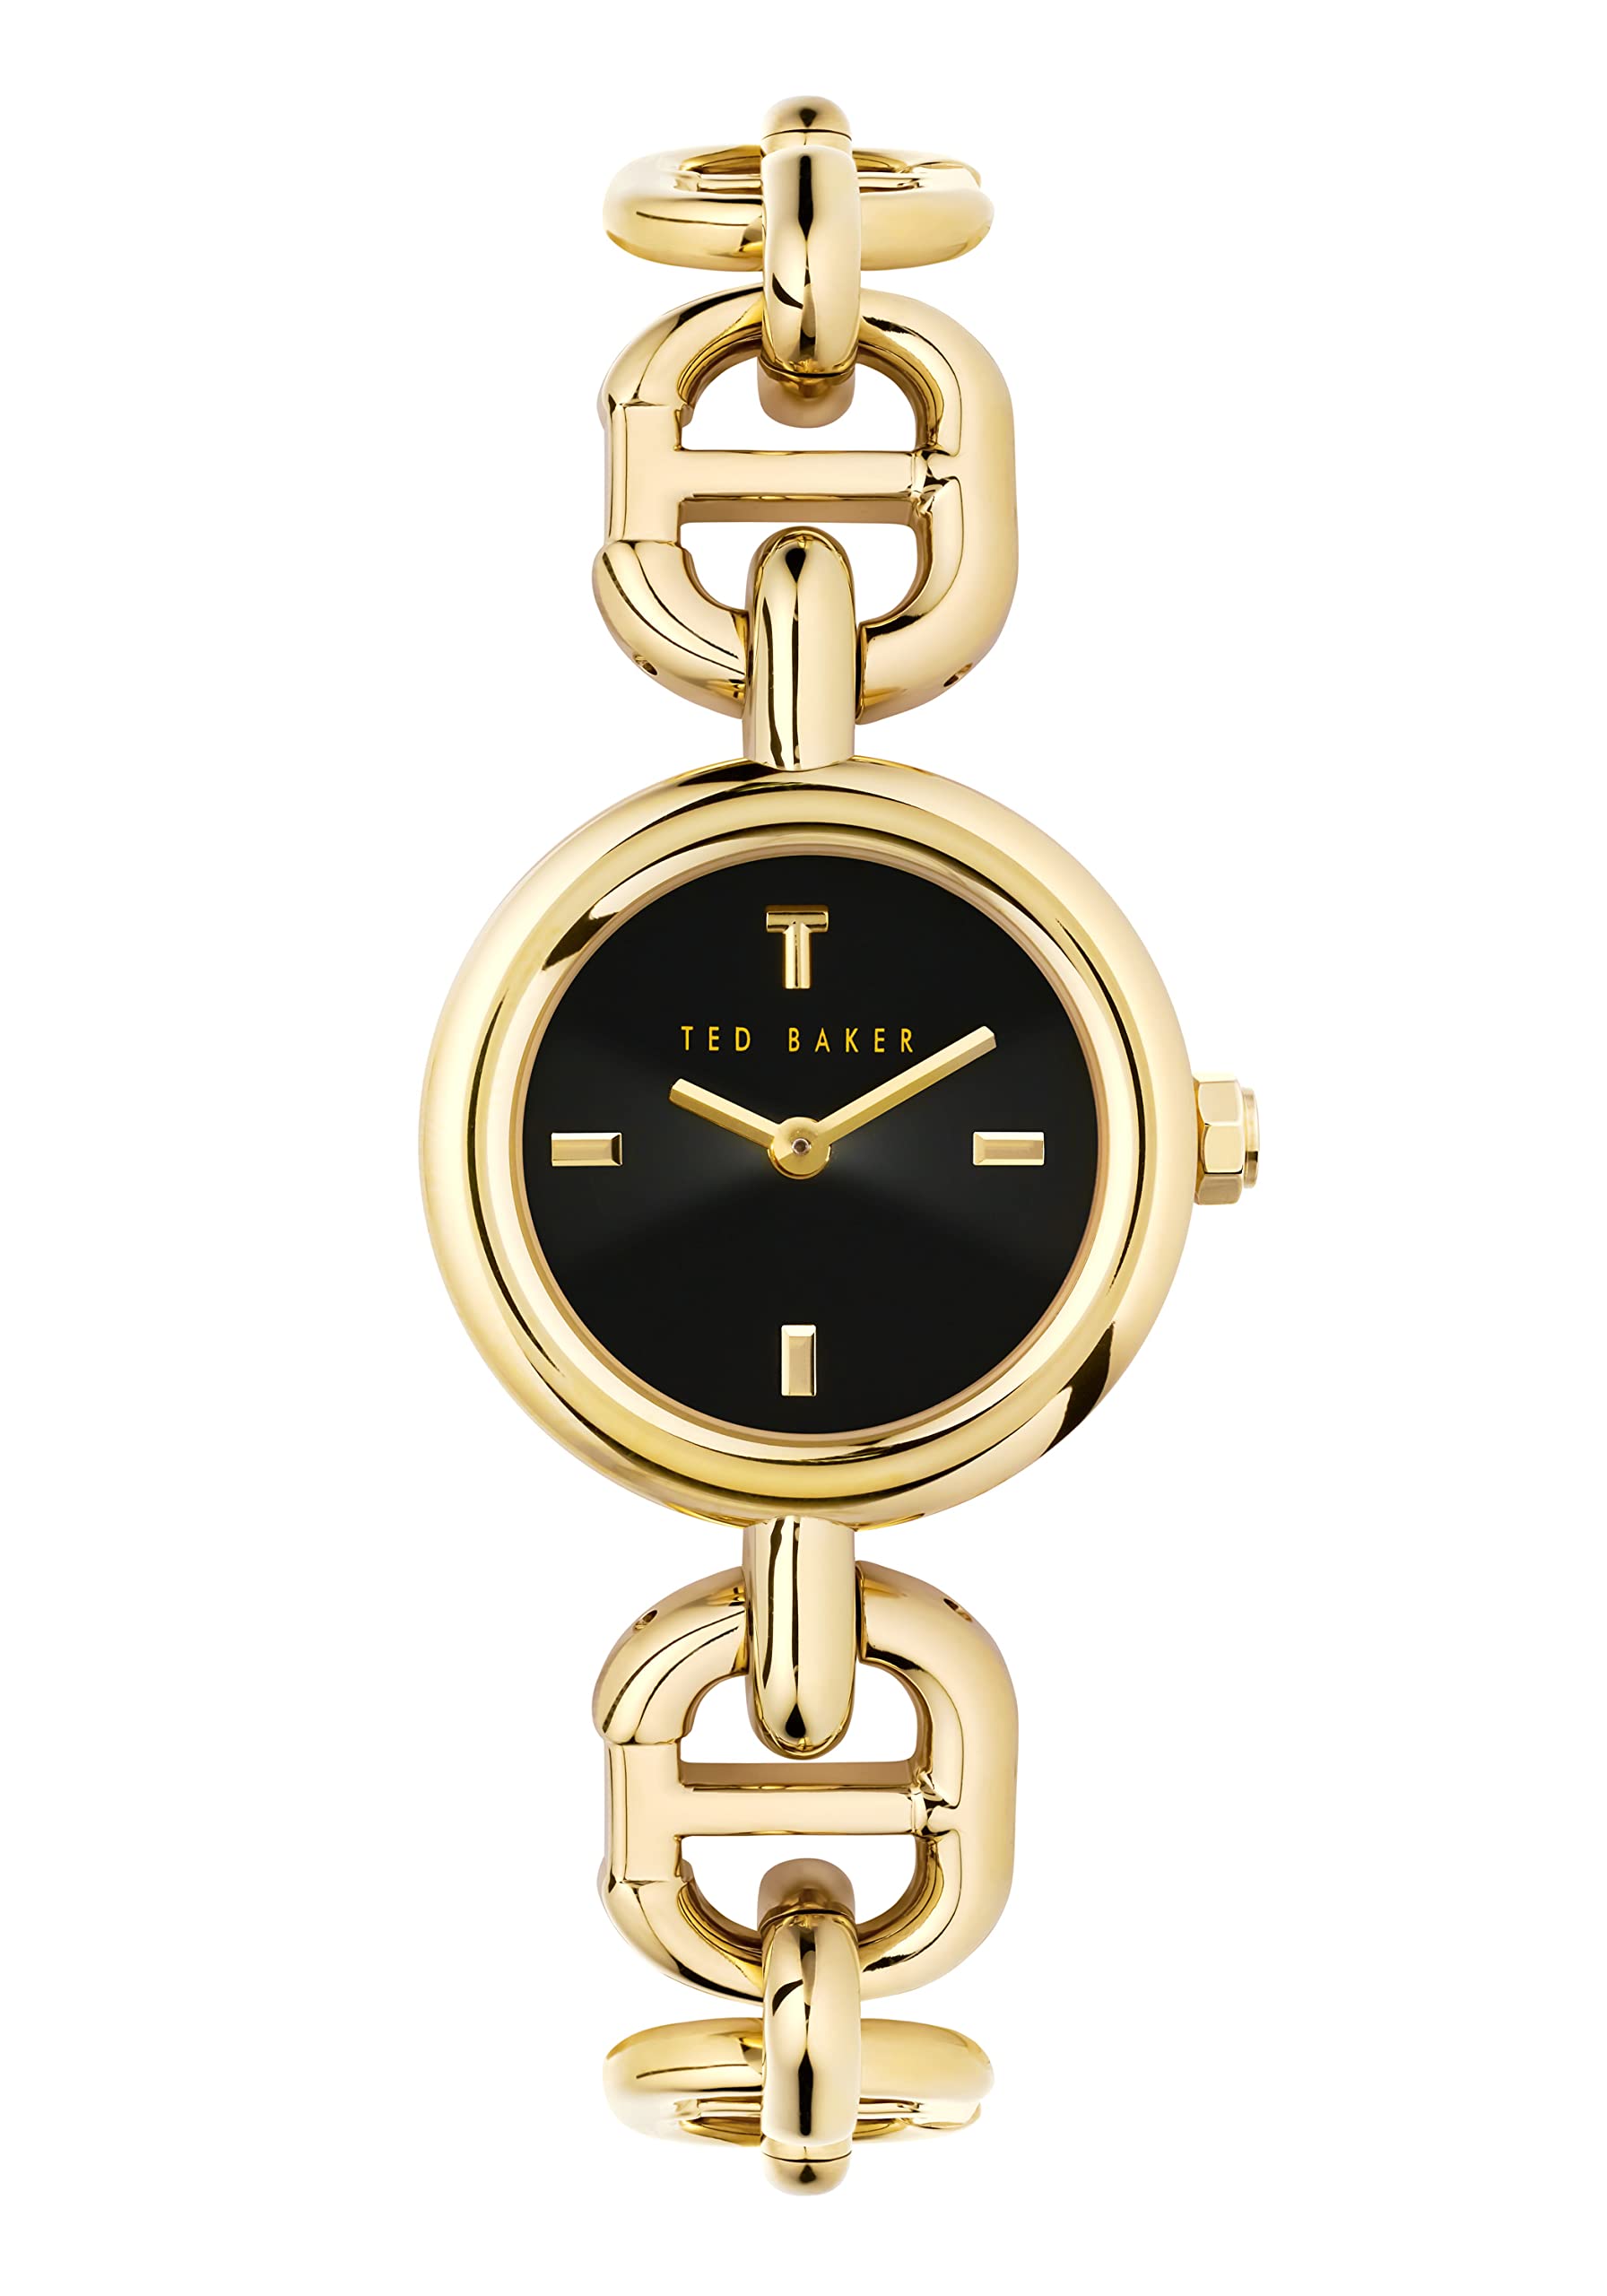 Ted Baker Margiot Stainless Steel Yellow Gold Chain Watch (Model: BKPMAF2019I)